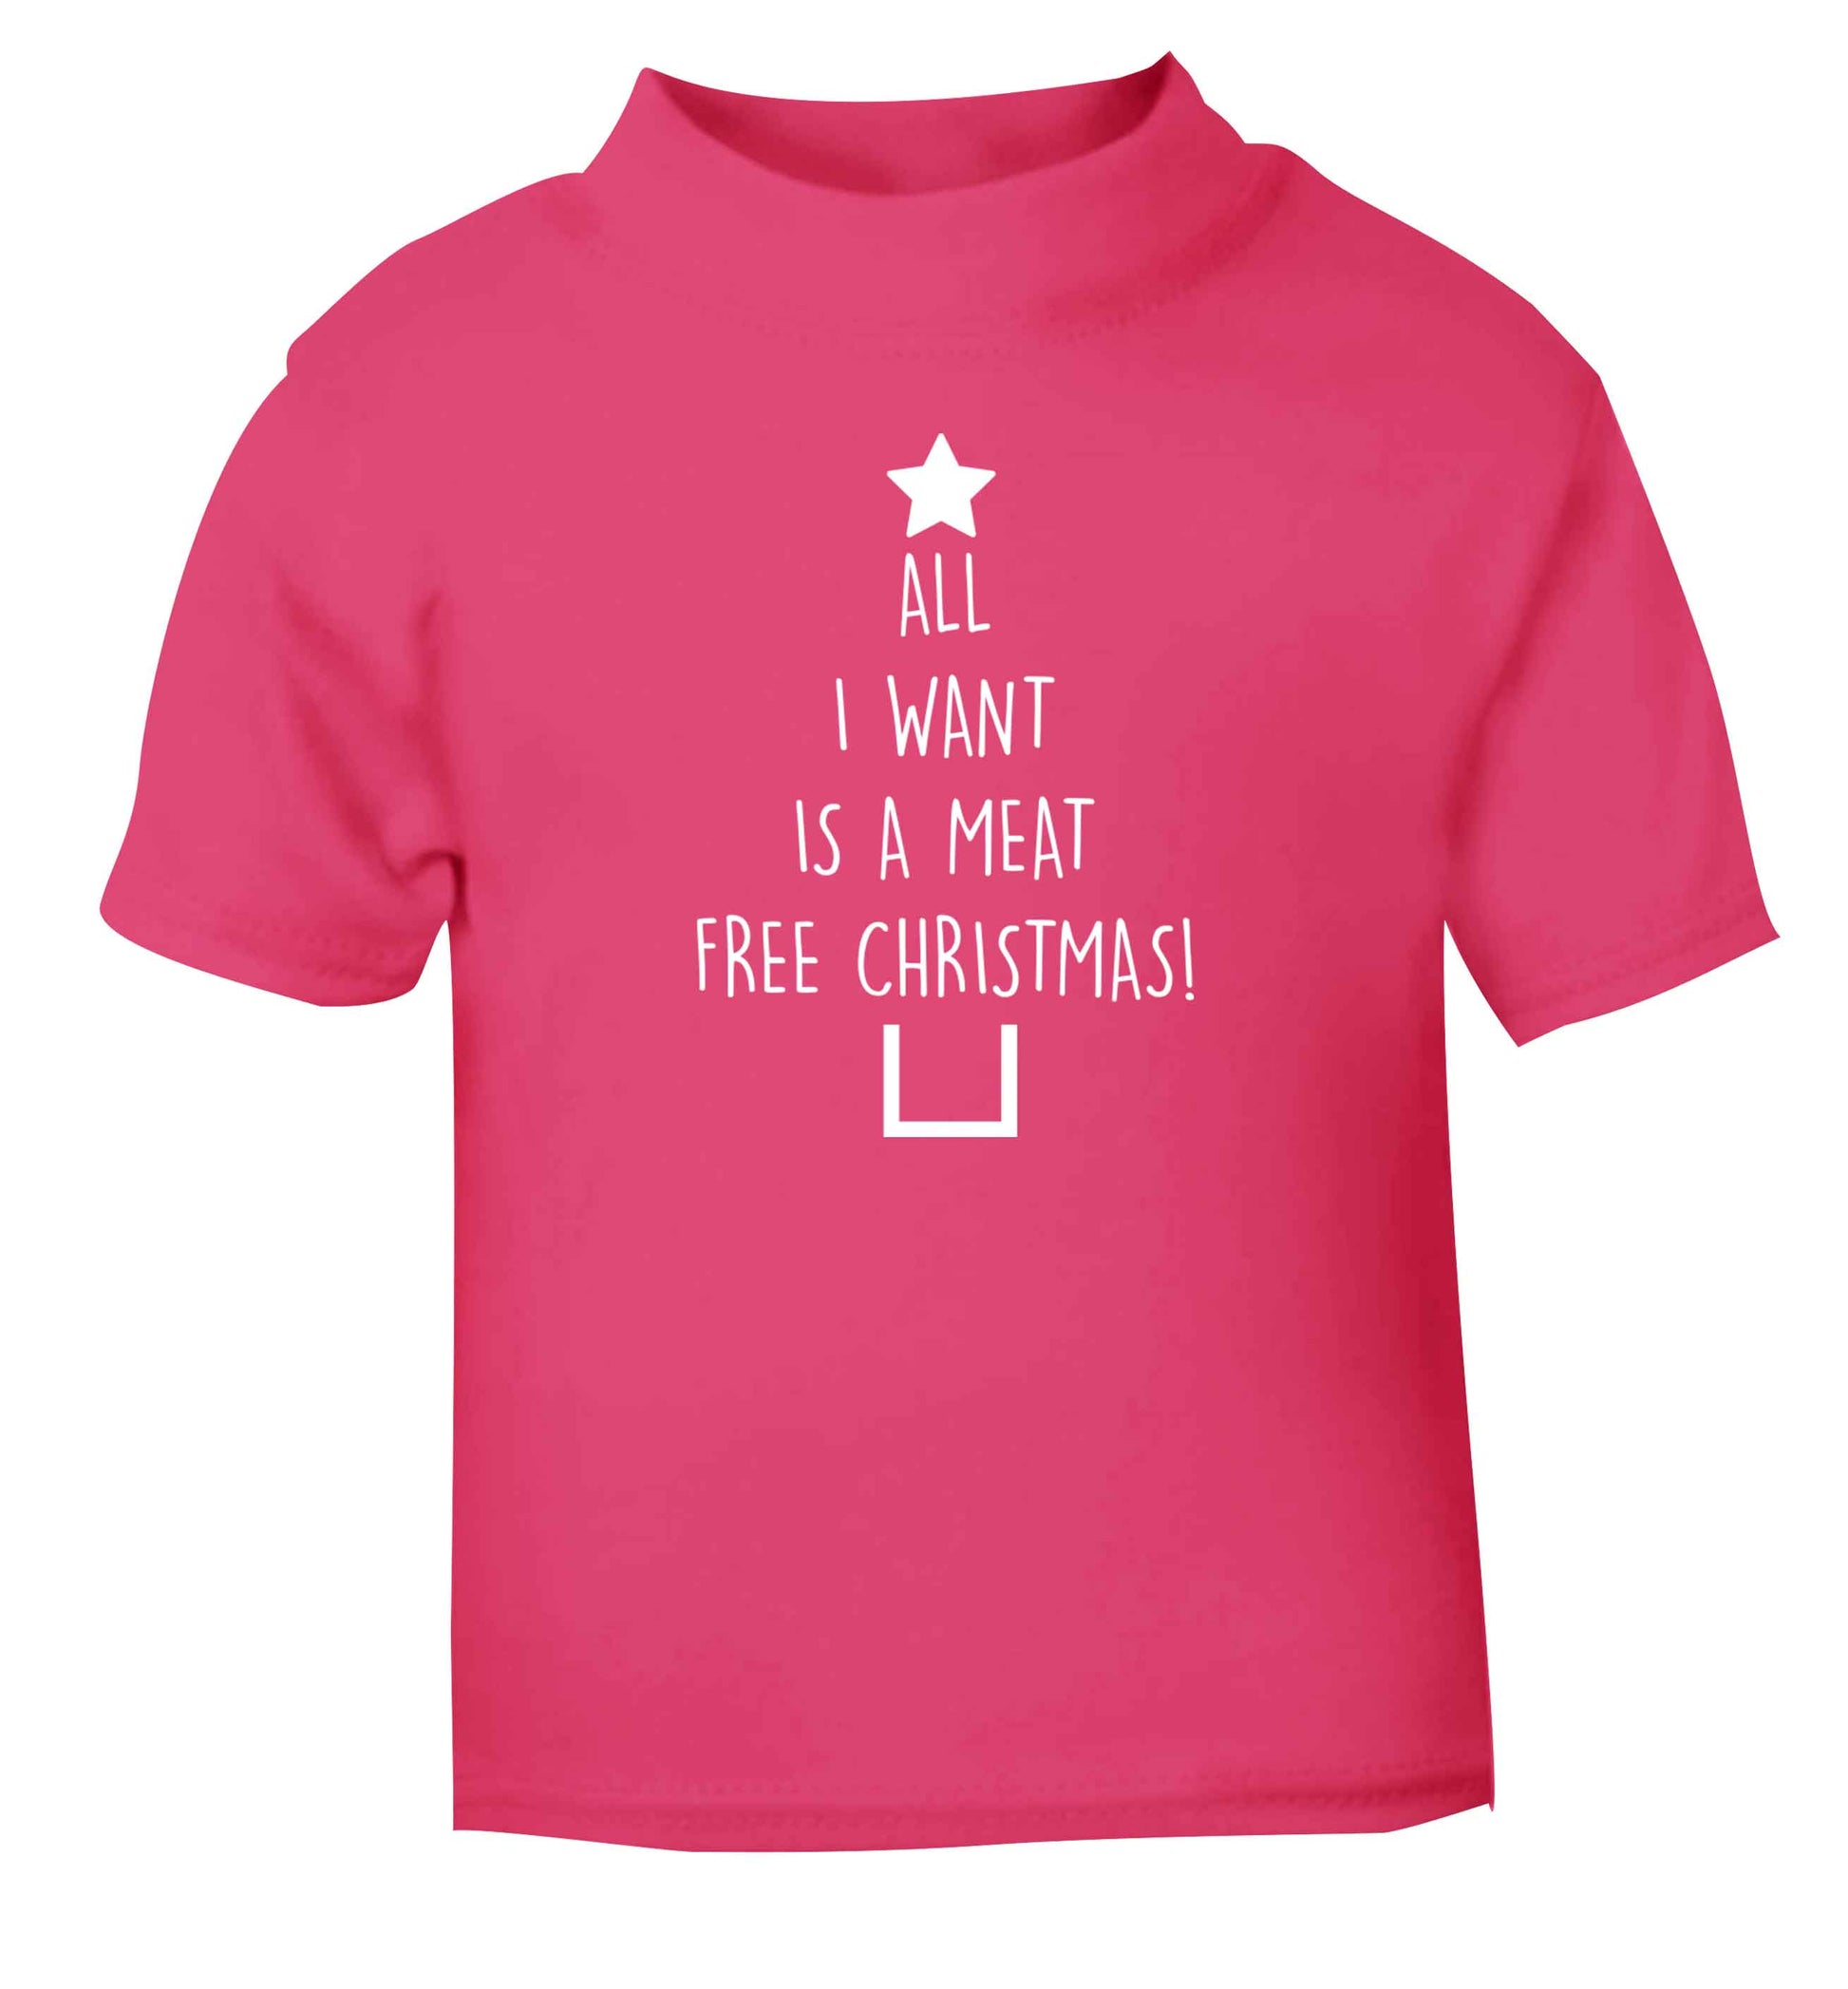 All I want is a meat free Christmas pink Baby Toddler Tshirt 2 Years